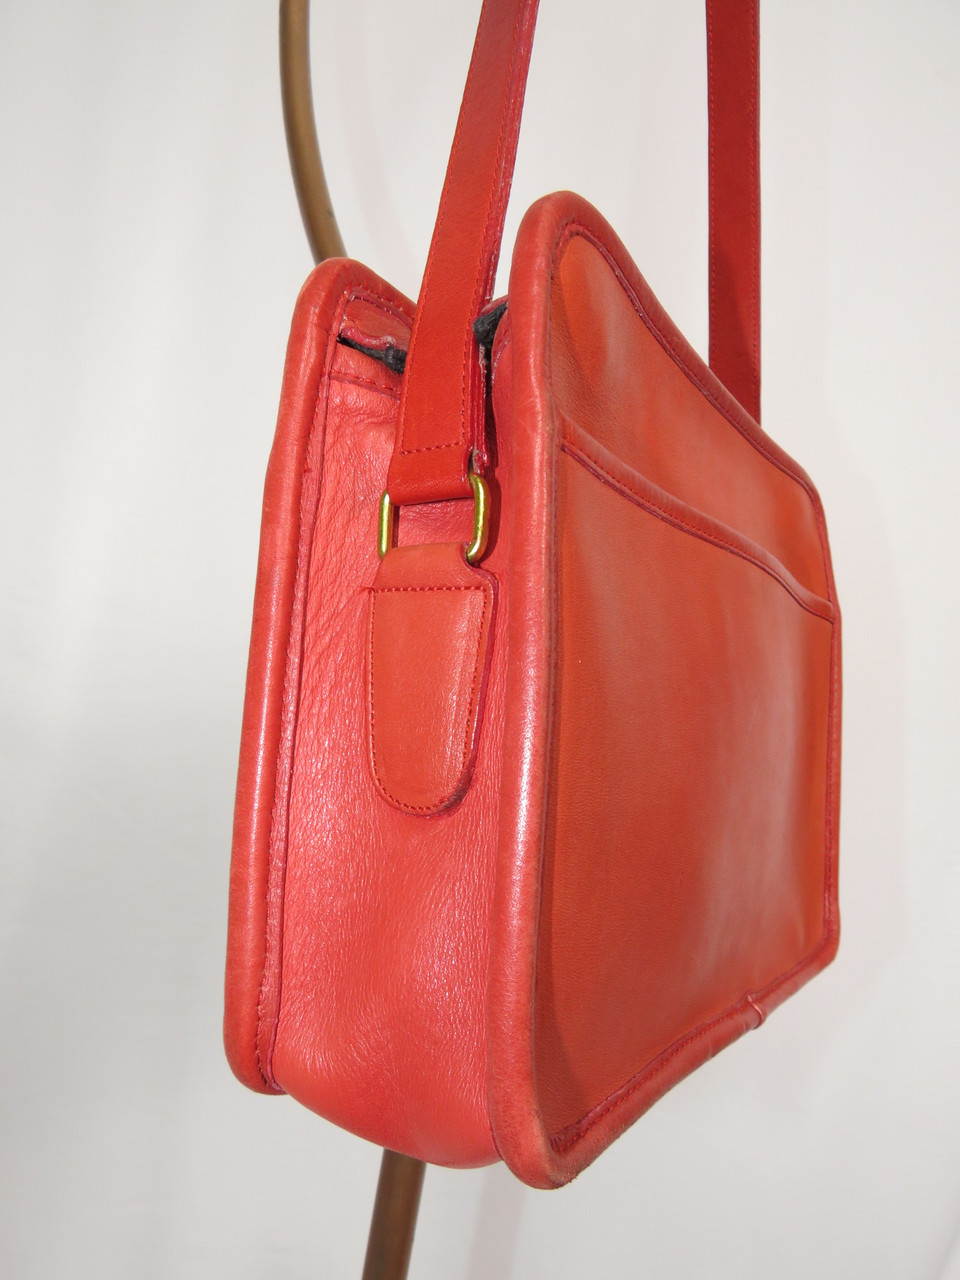 Coach Brick Red Leather Square Bag - Orlando Vintage Clothing and